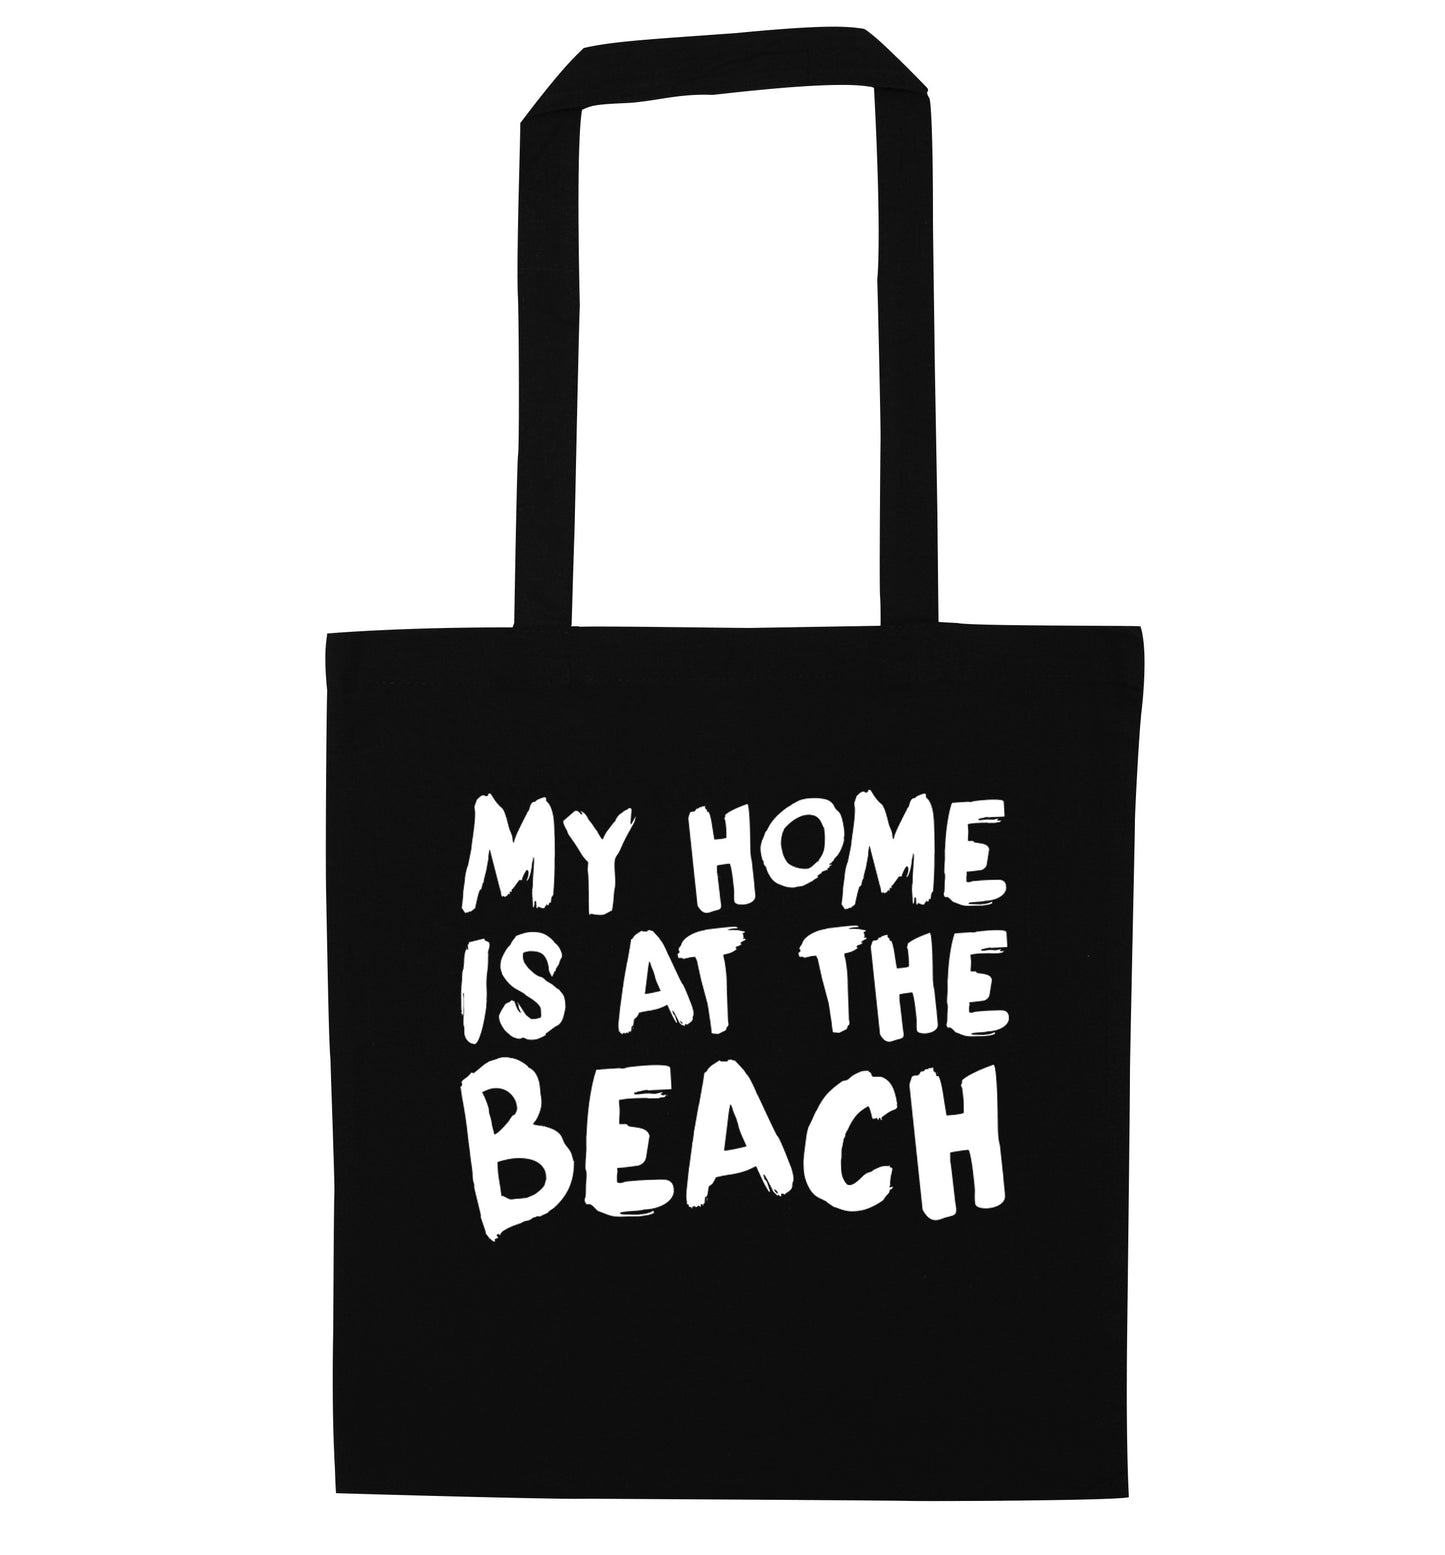 My home is at the beach black tote bag